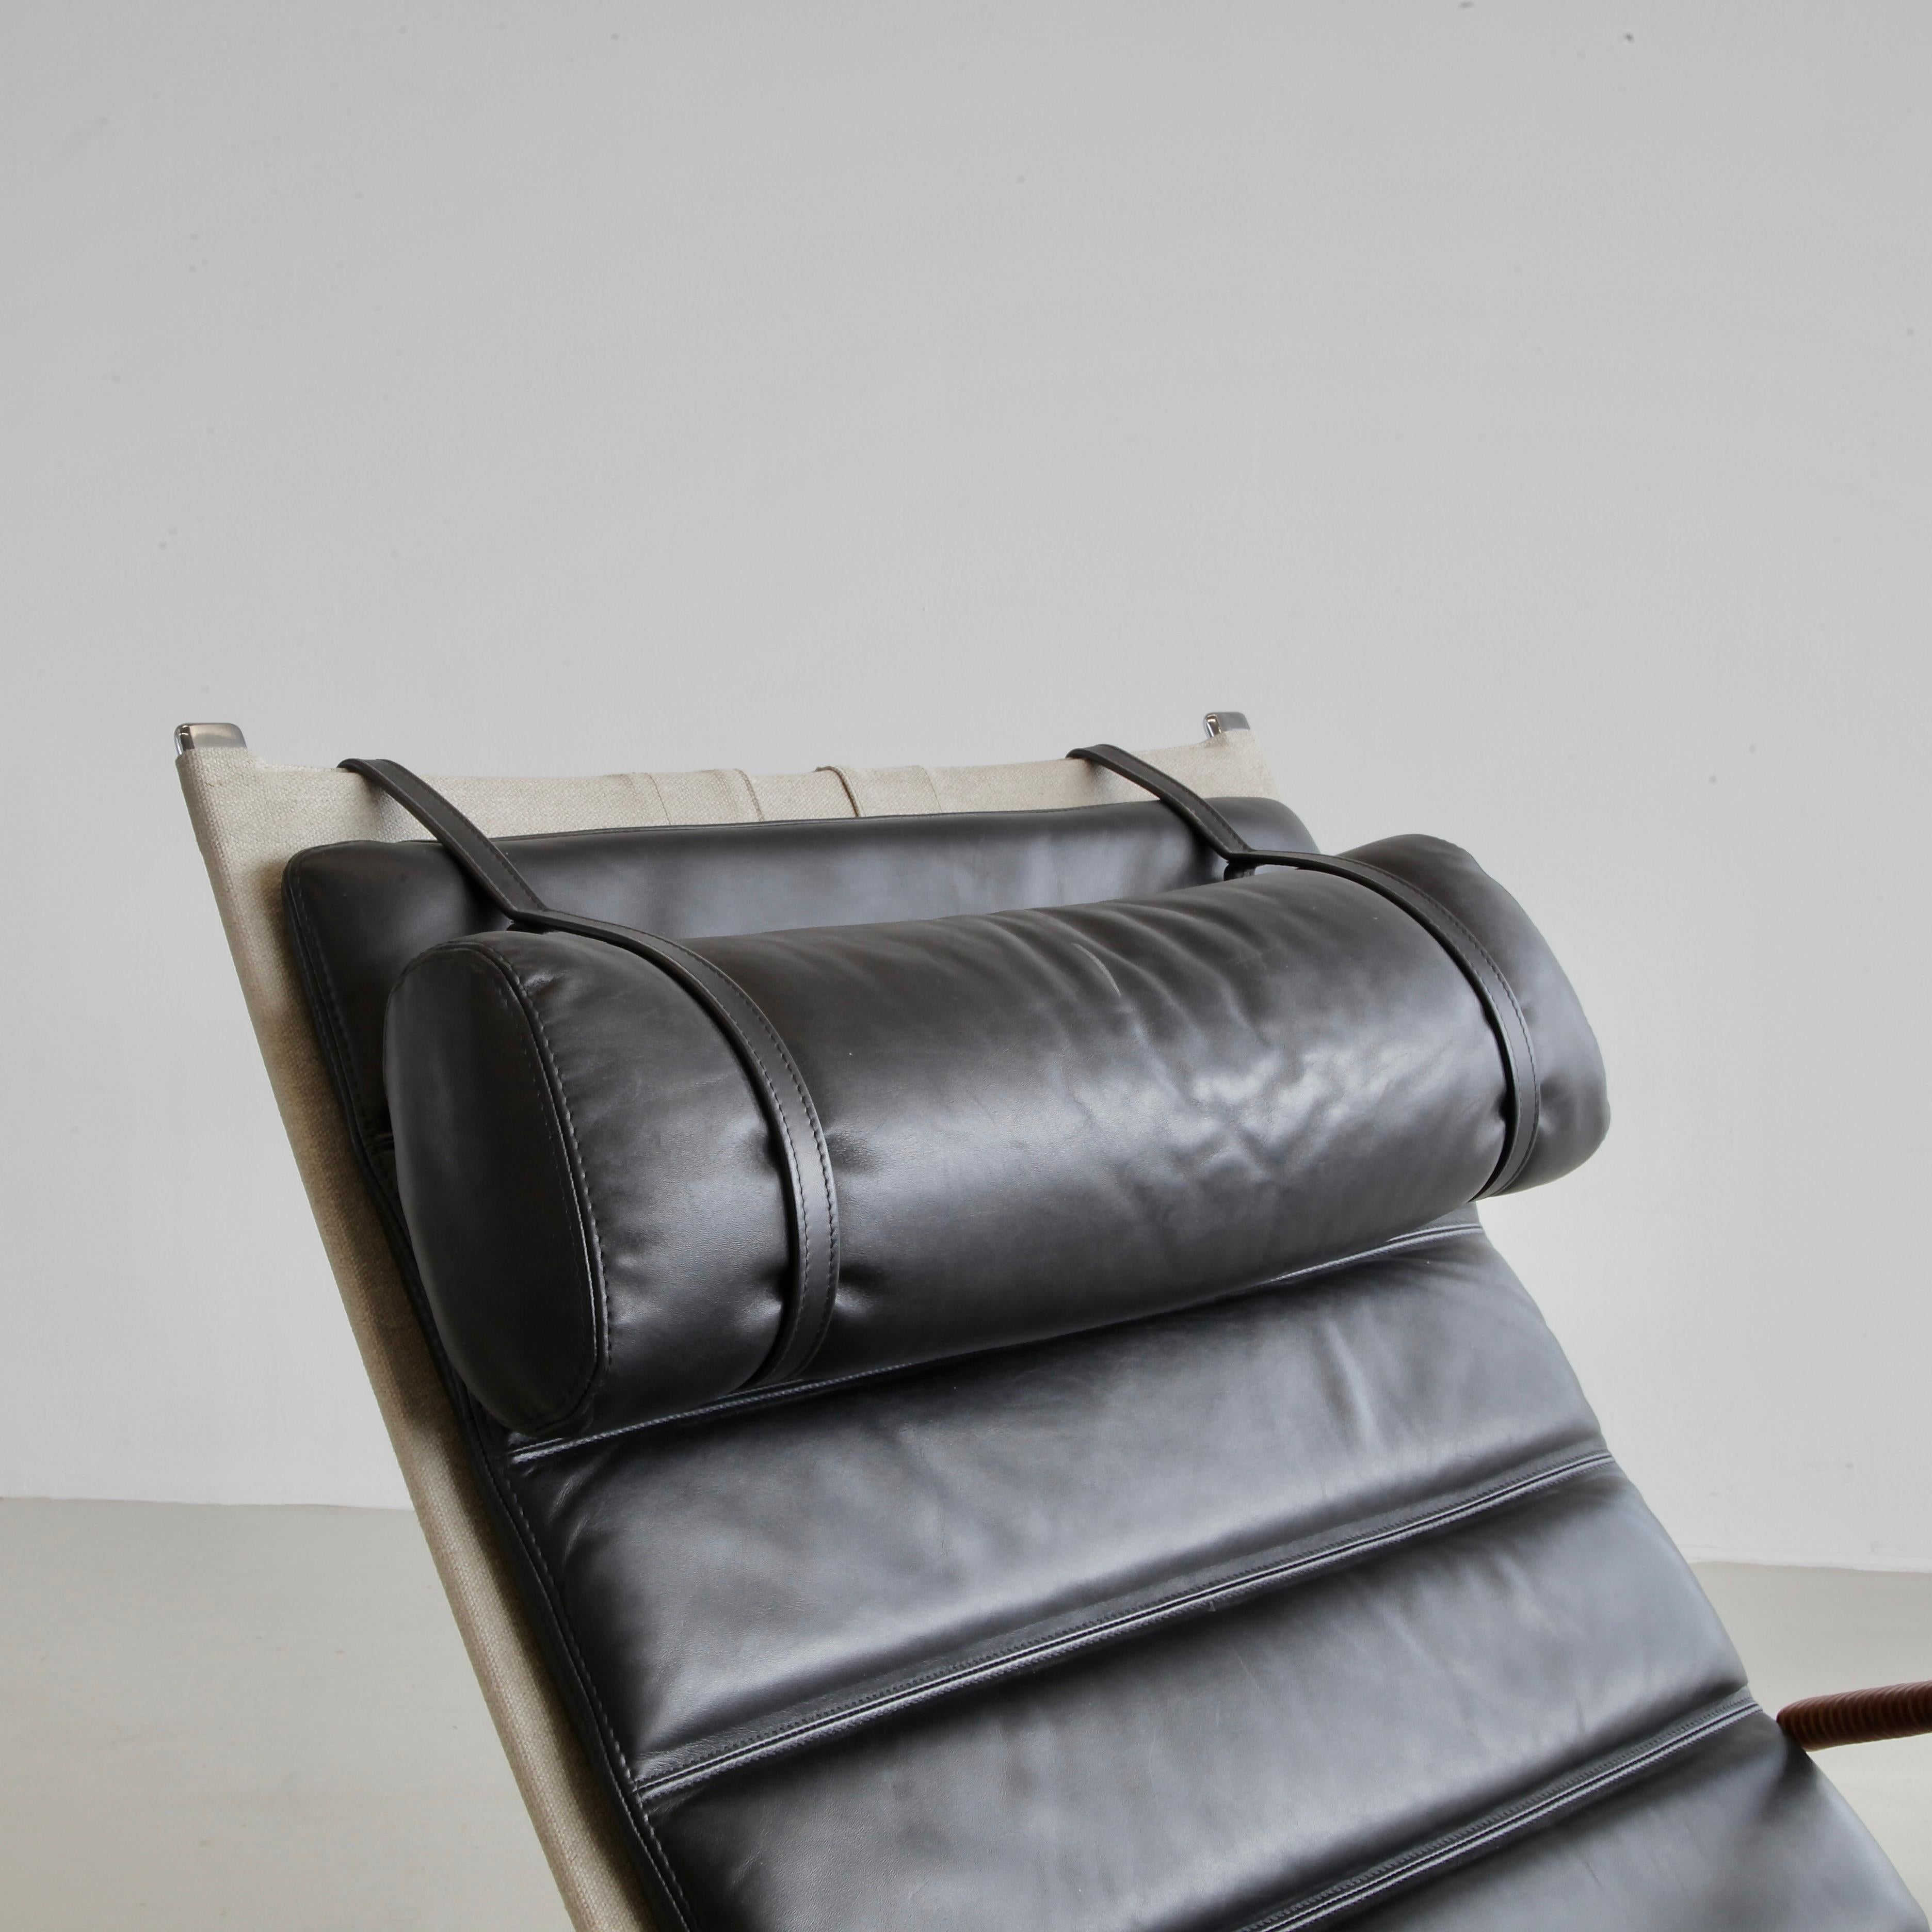 Early original FK87 chaise longue produced by Alfred Kill (Kill International) and designed by the design duo Preban Fabricius & Jørgen Kastholm. Matted chrome-plated metal base with a coarse linen cover and loose black leather cushions and a